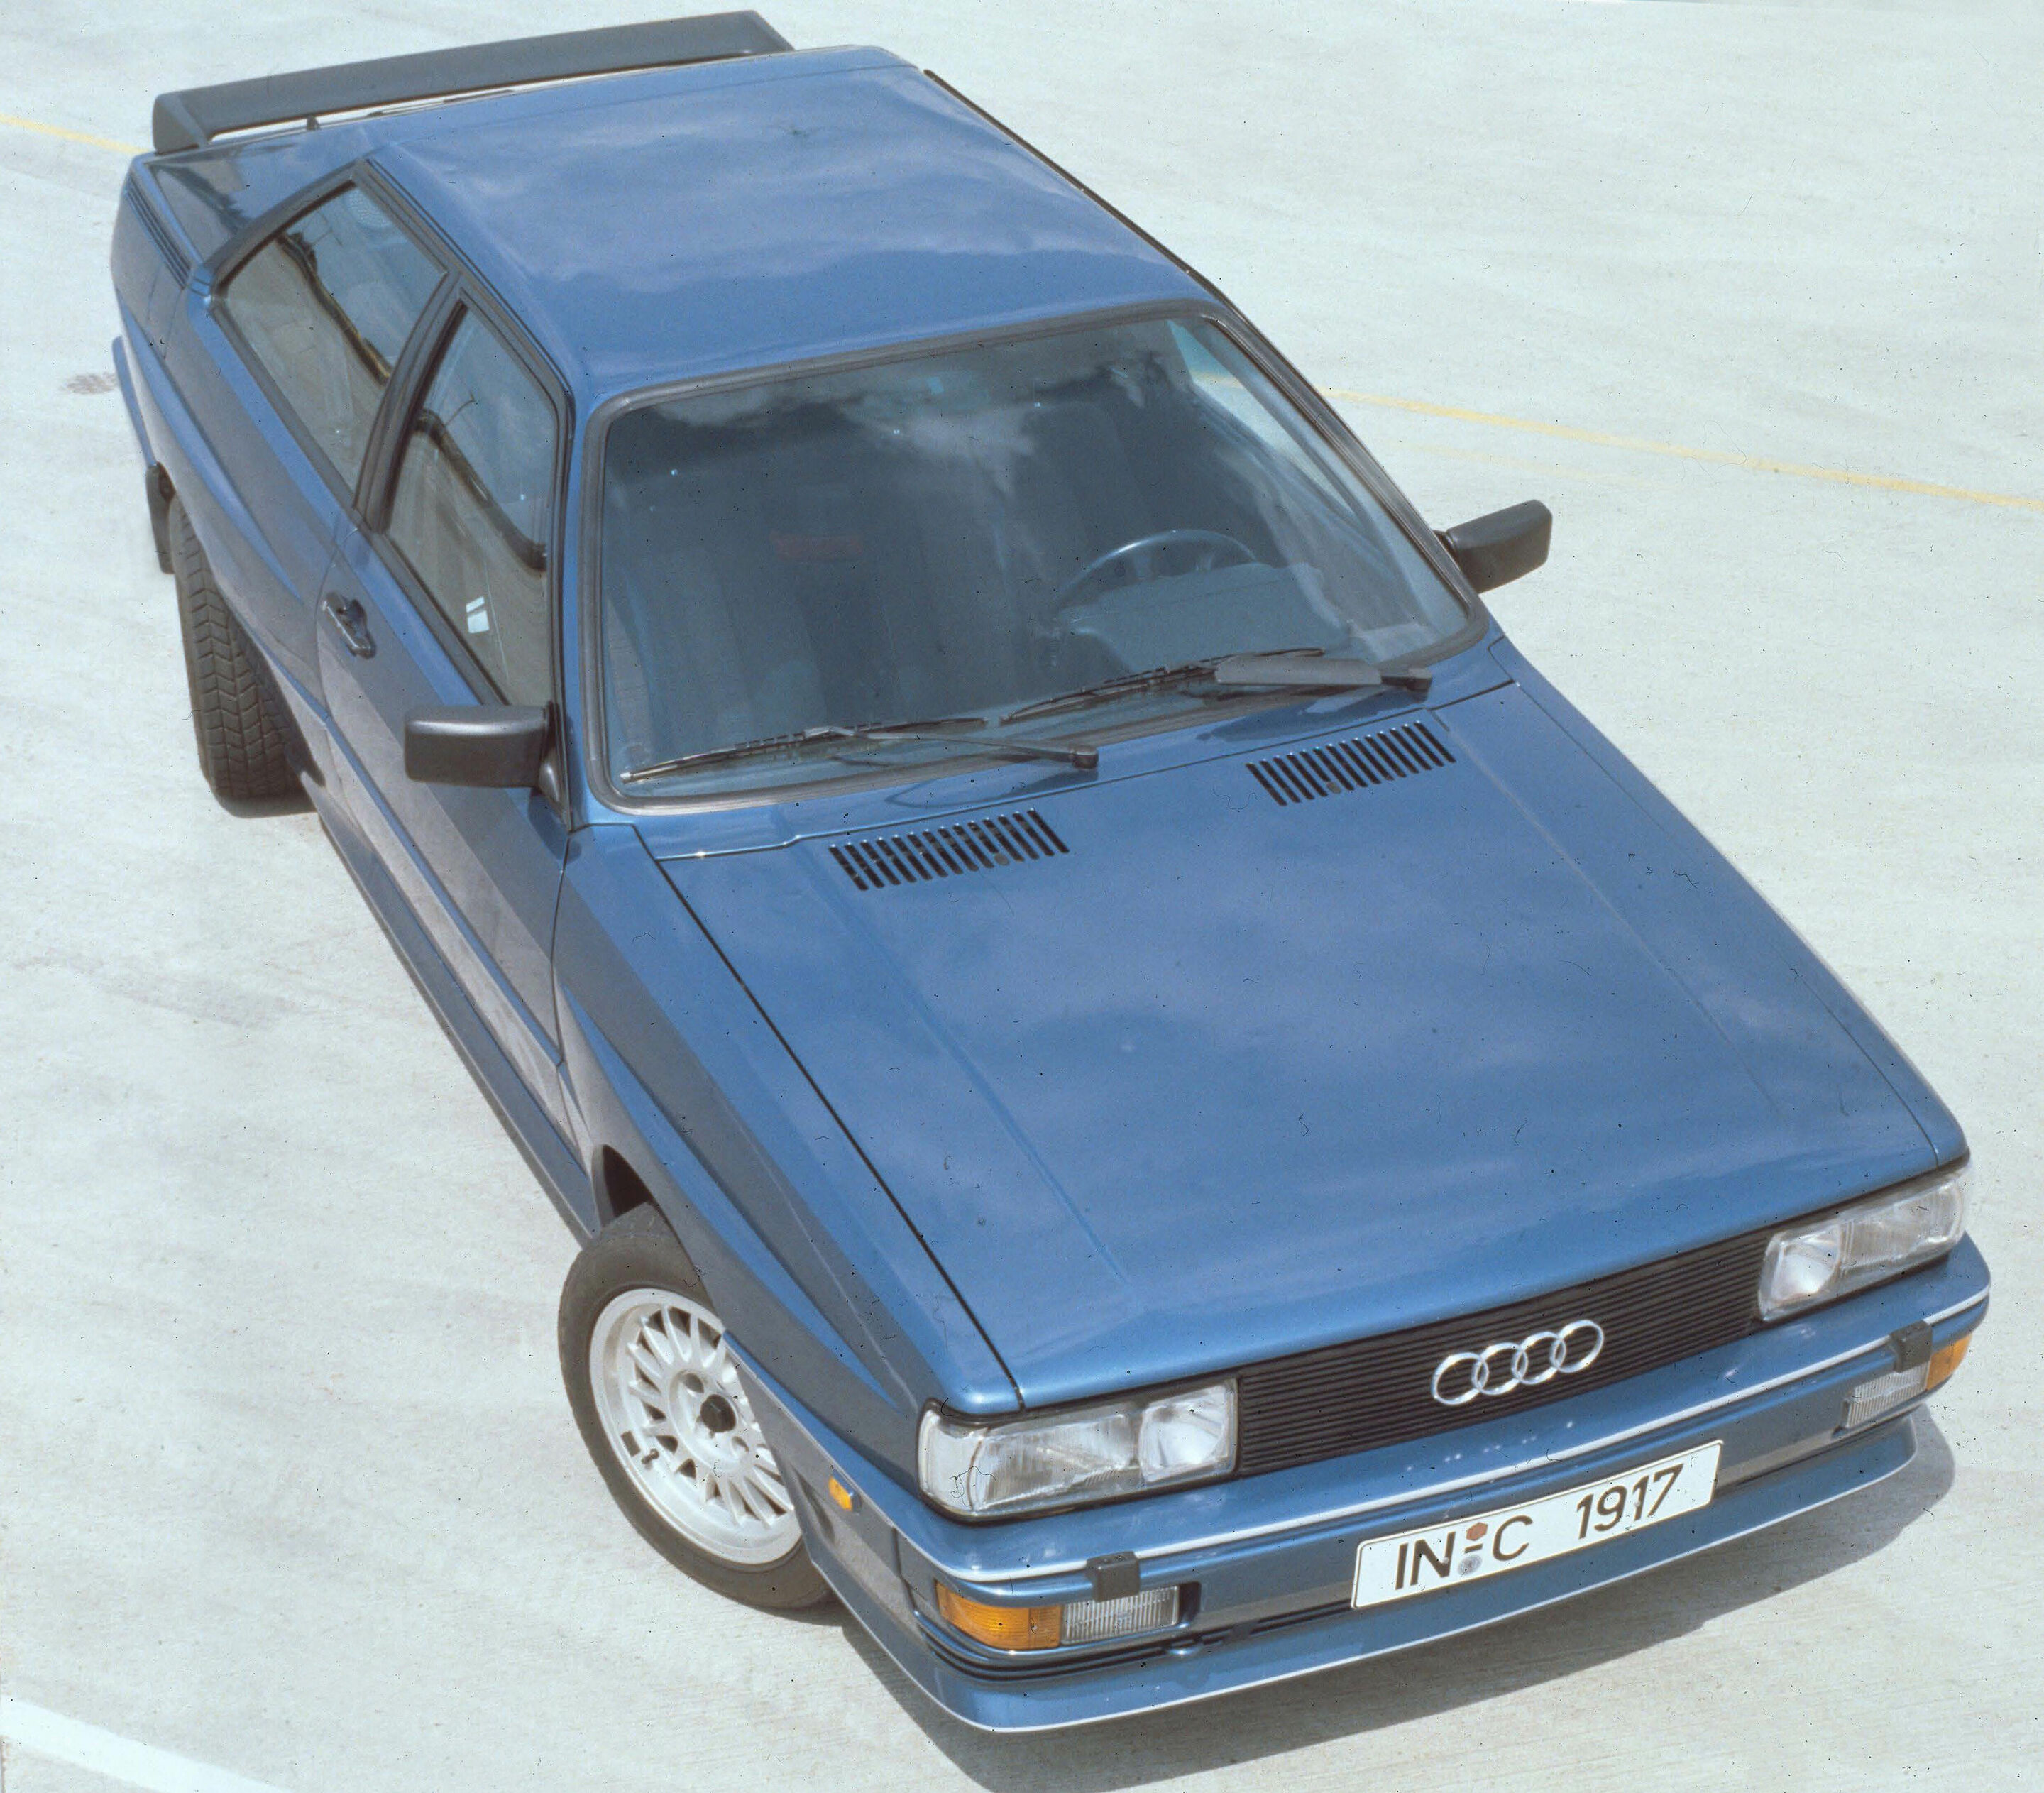 „I like it” – and the winner is: Audi quattro